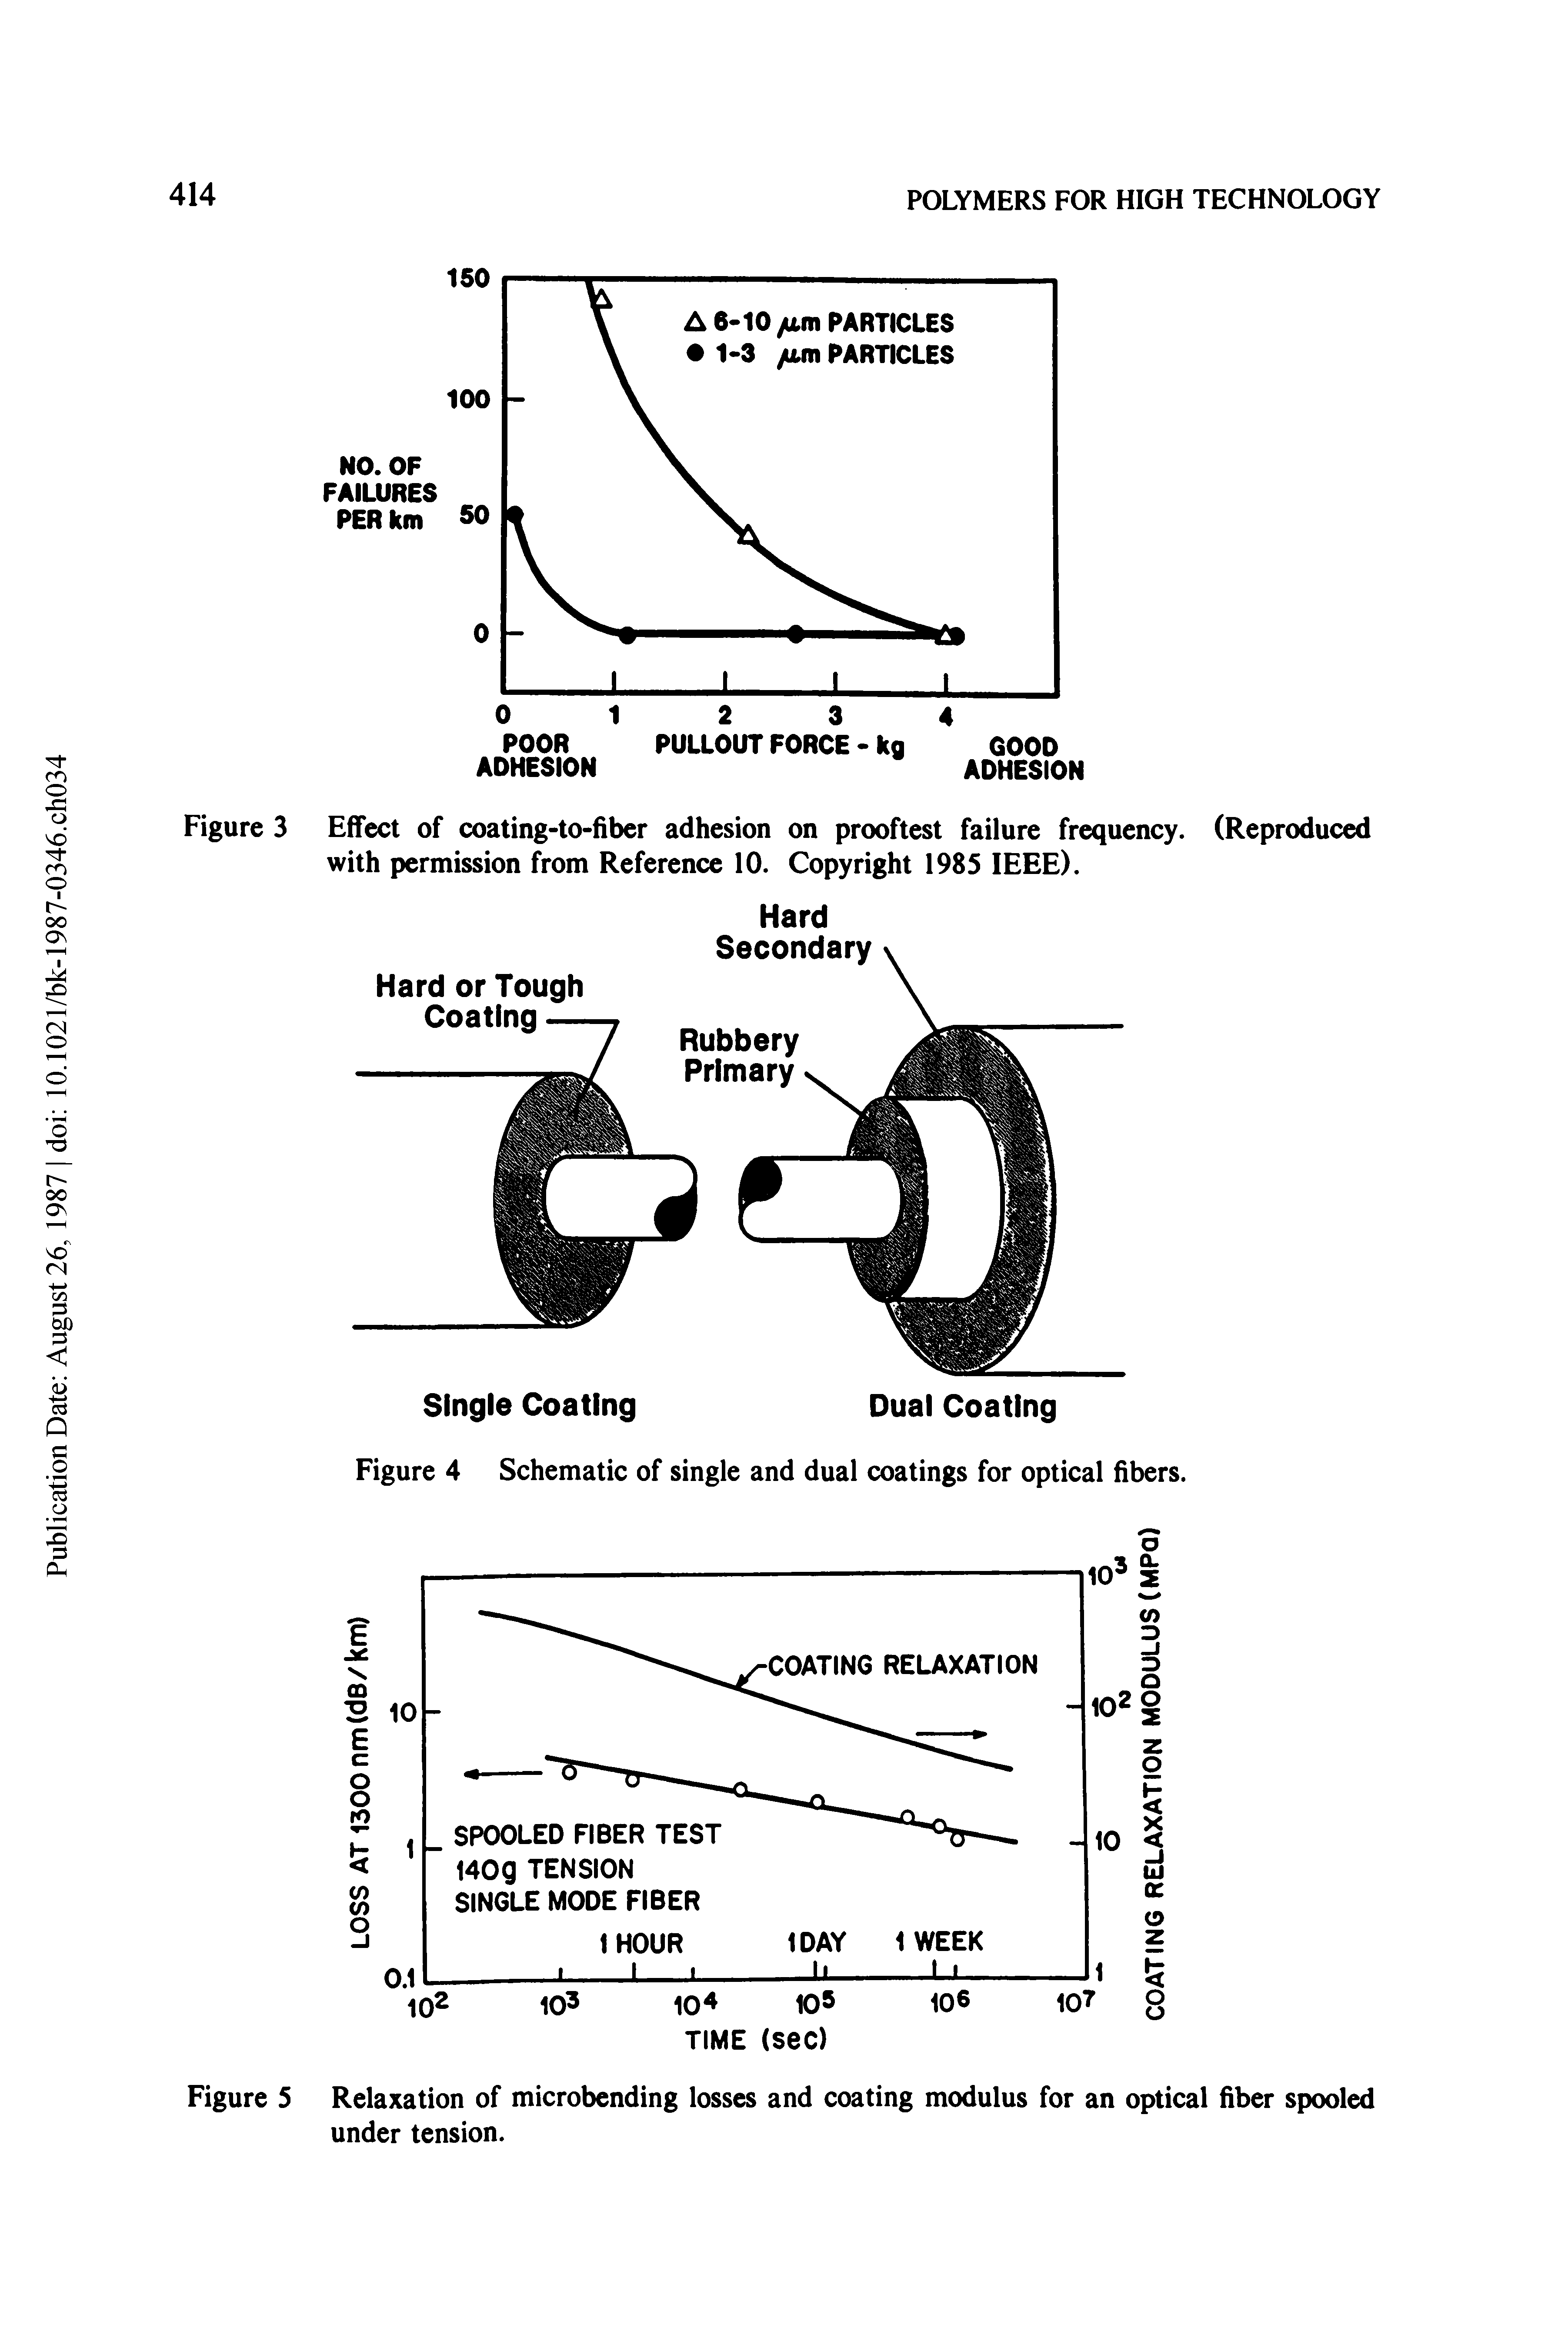 Figure 4 Schematic of single and dual coatings for optical fibers.